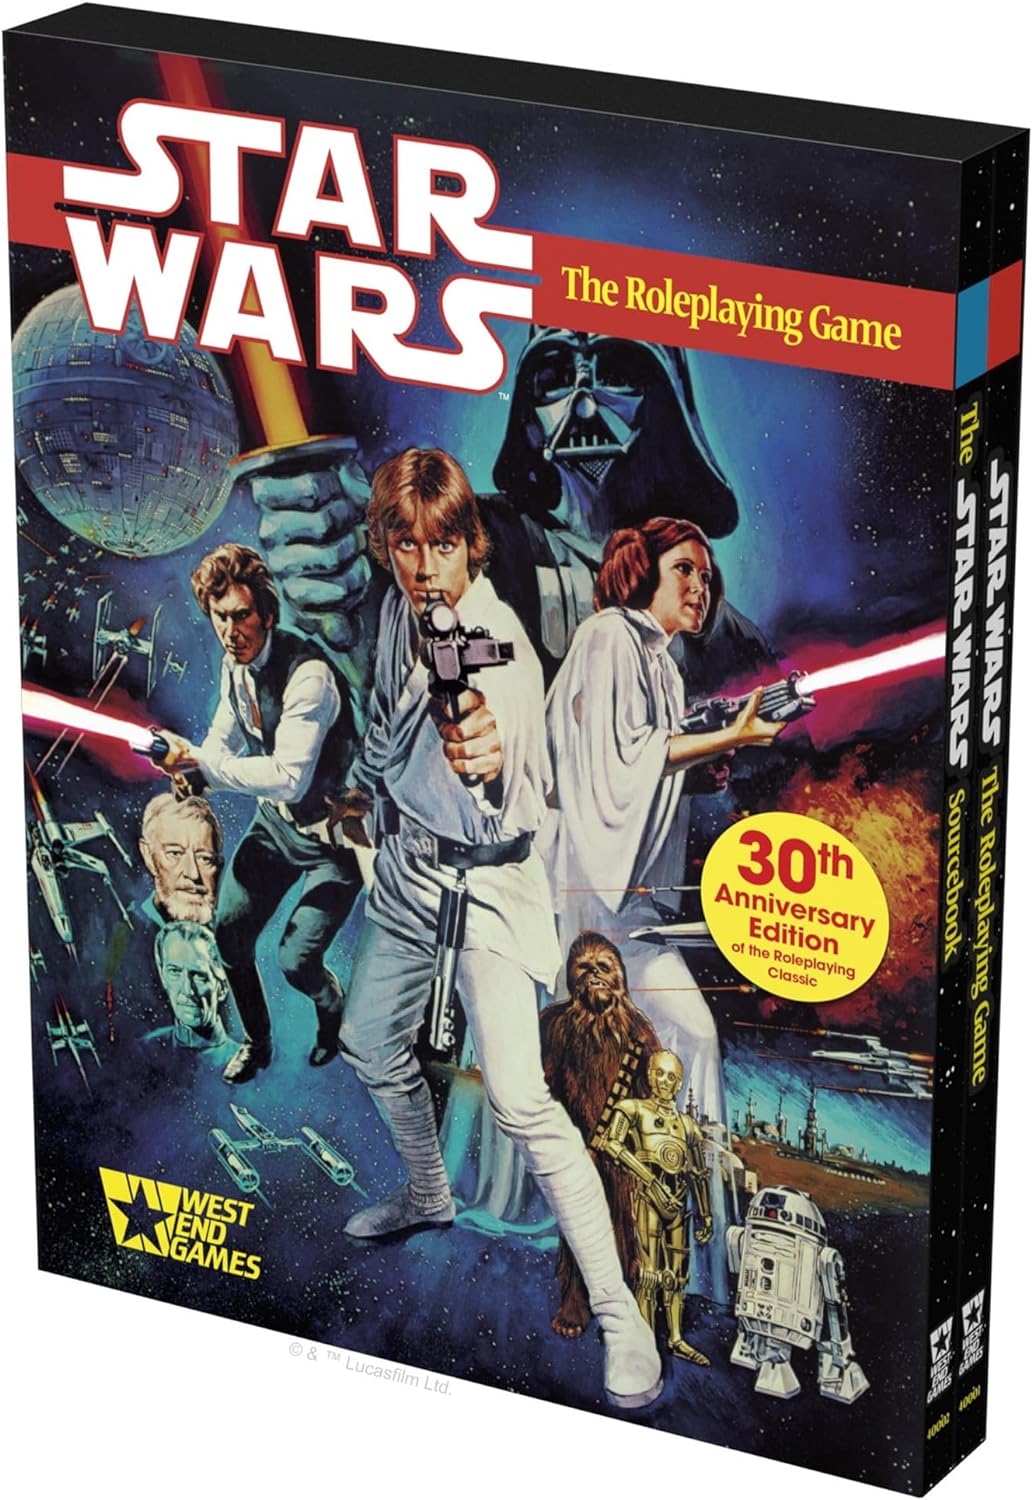 STAR WARS: THE ROLEPLAYING GAME 30TH ANNIVERSARY